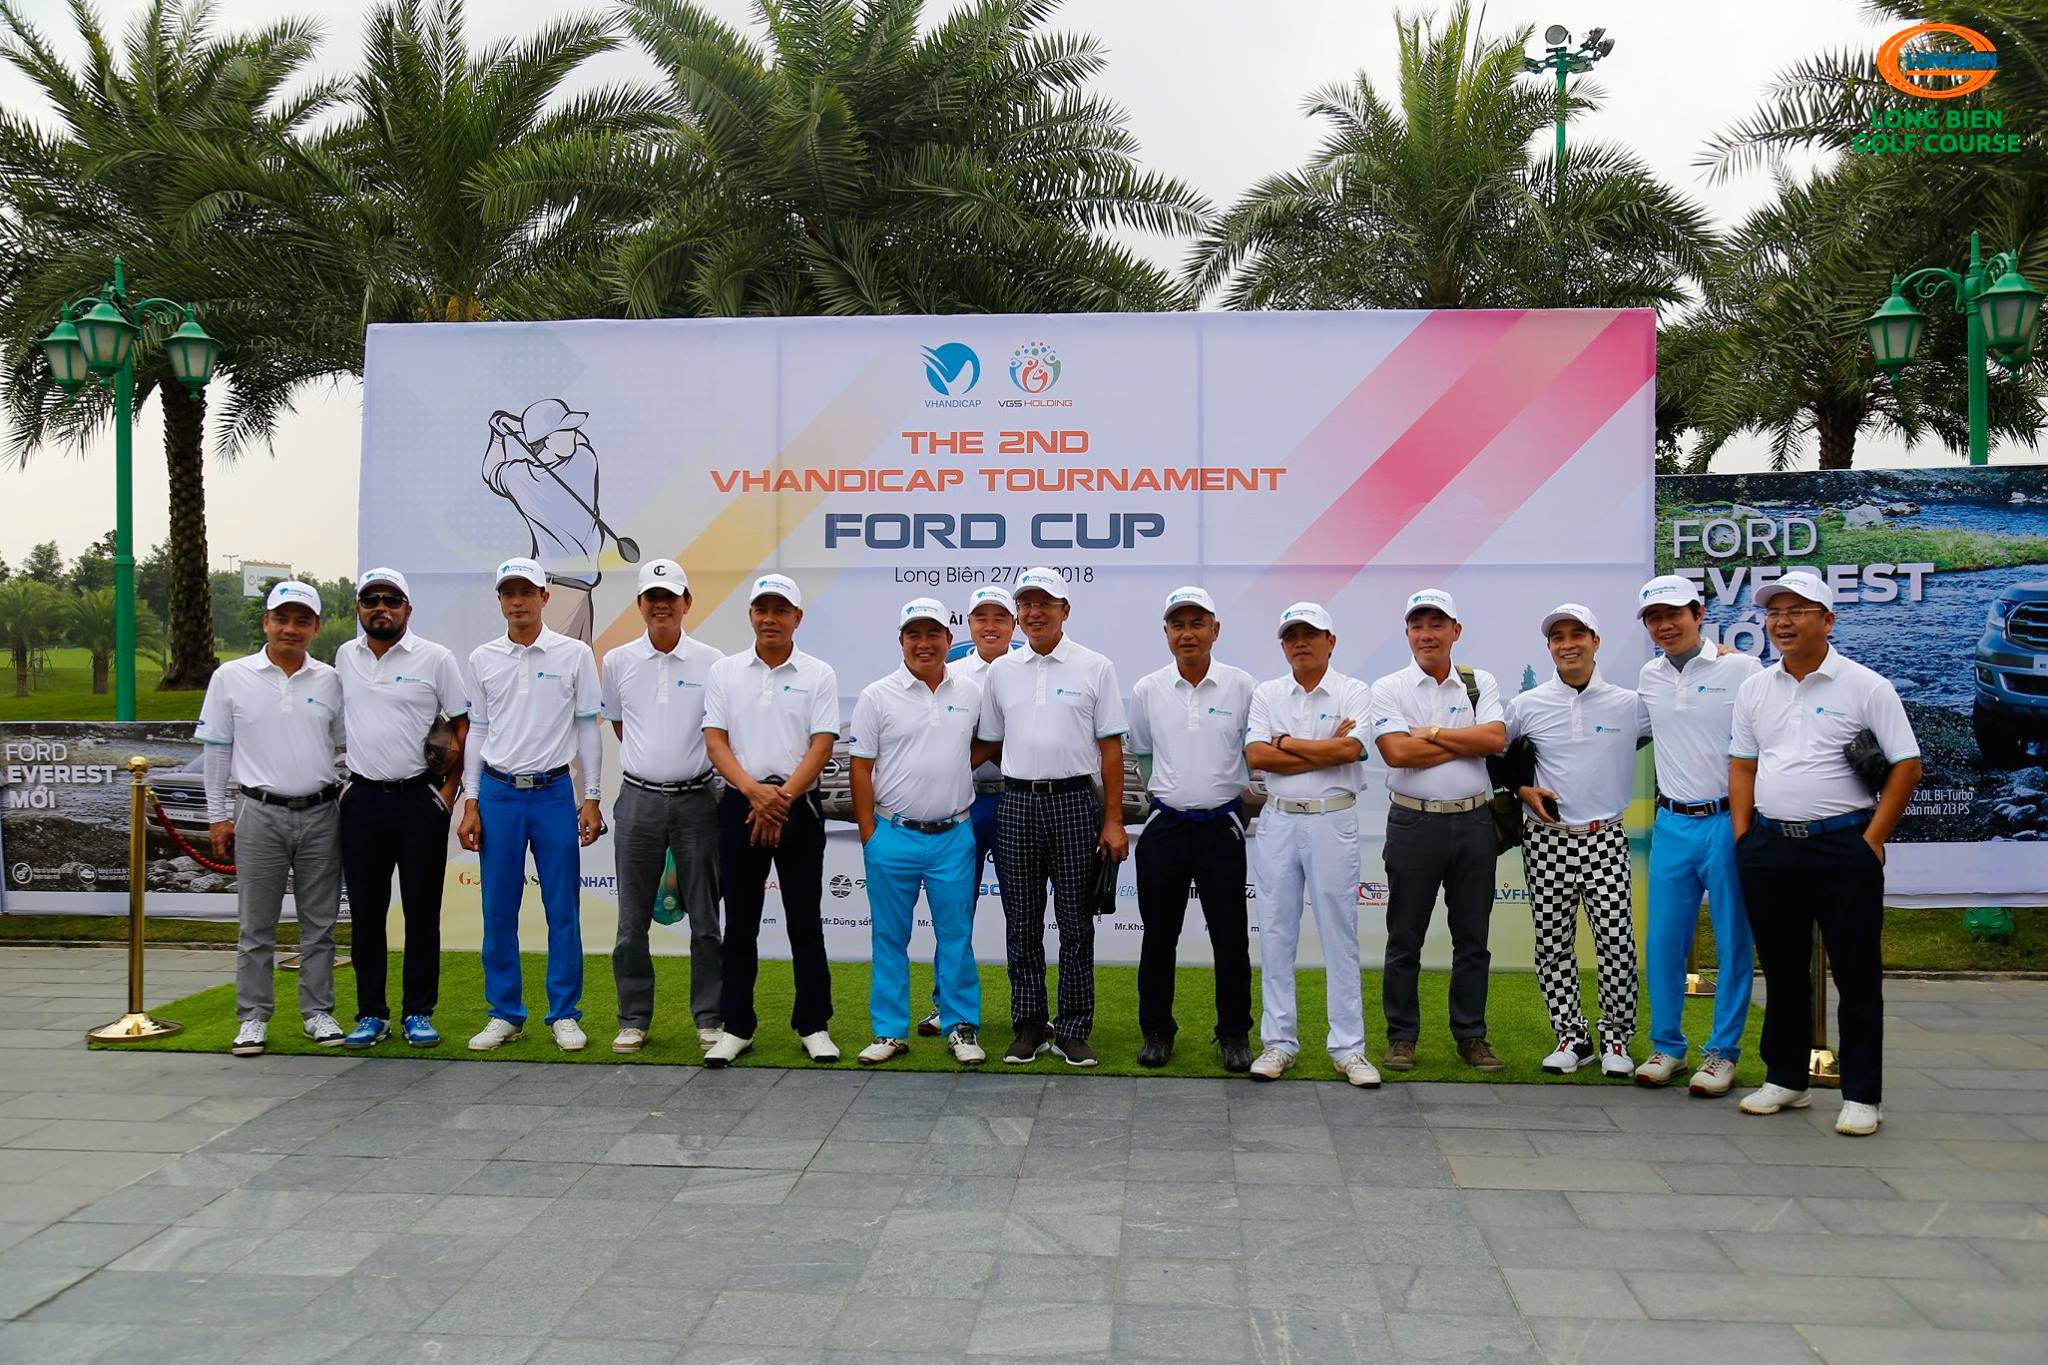 The 2nd VHandicap Tournament – Ford Cup